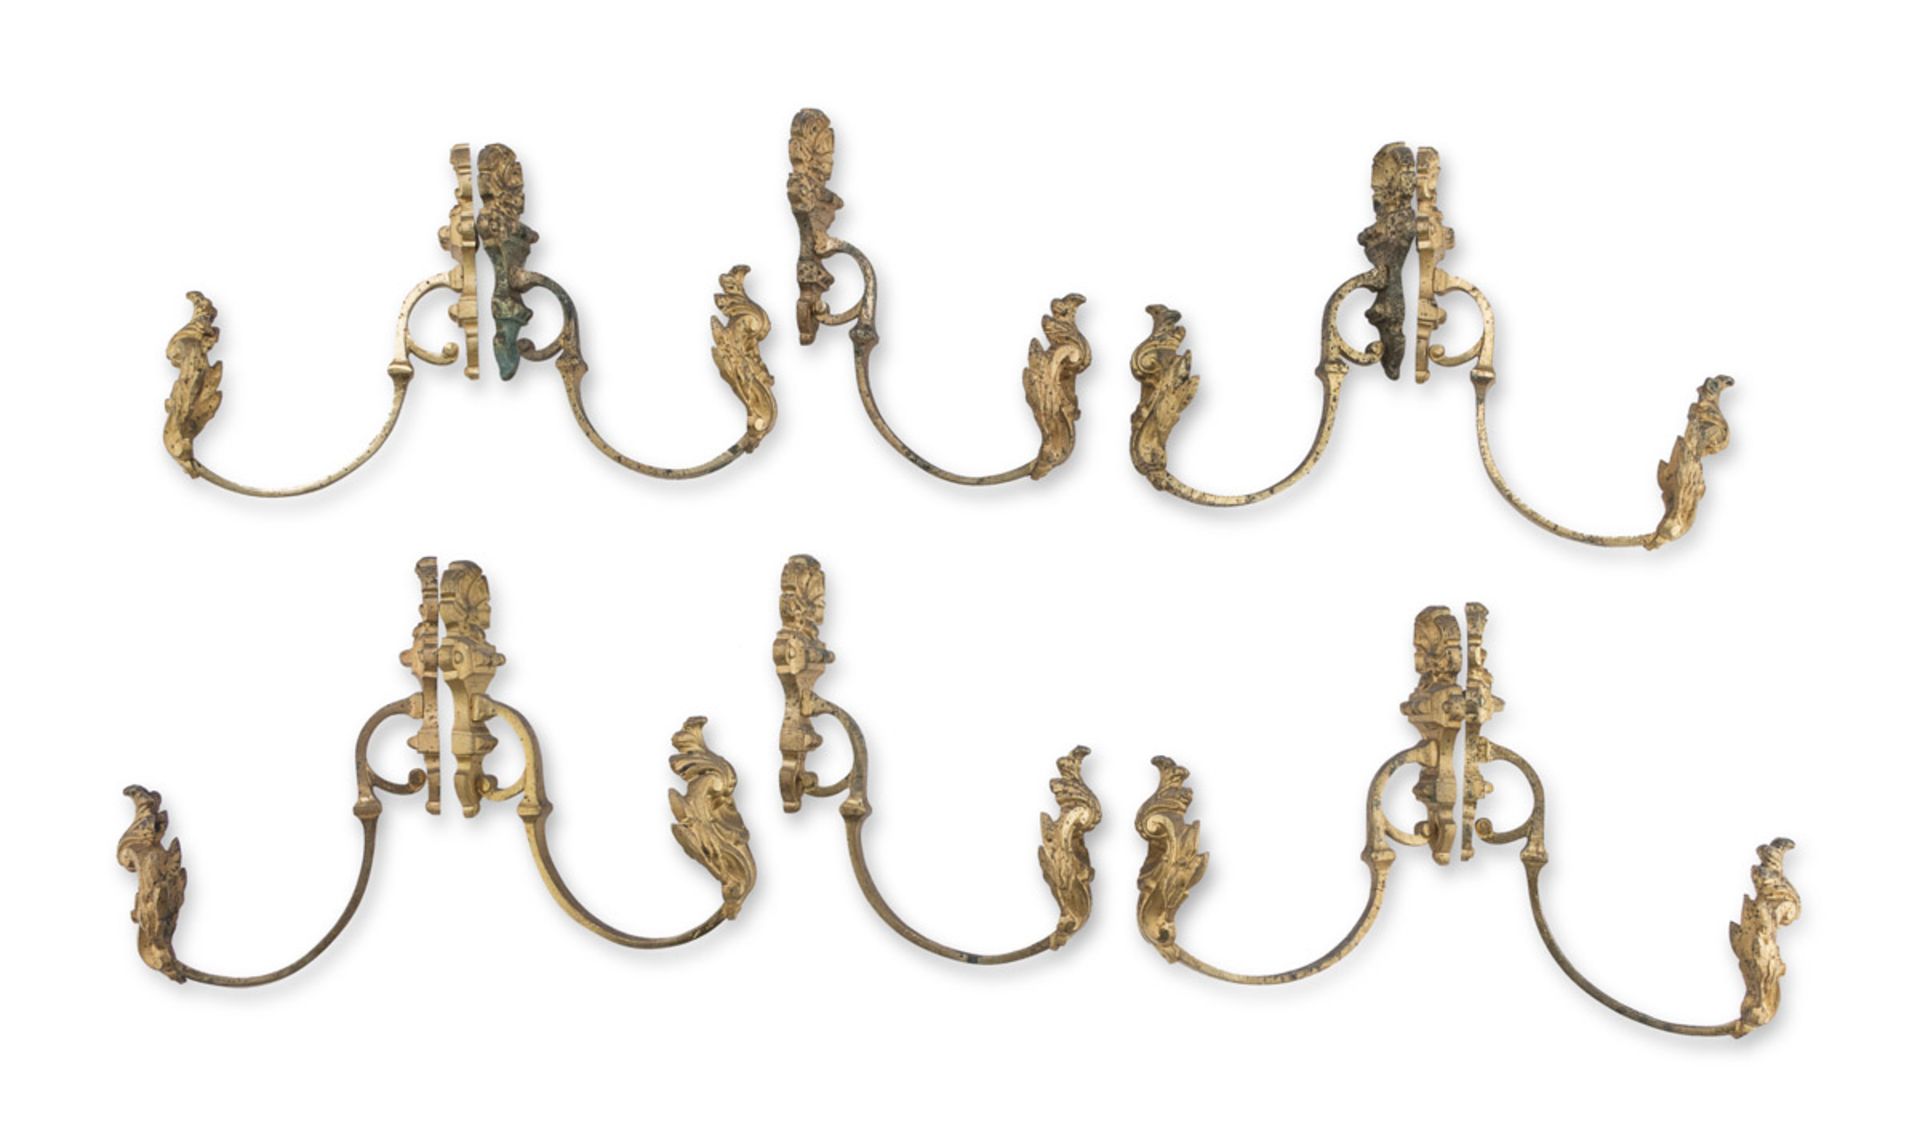 FIVE PAIRS OF CURTAIN RODS 19th CENTURY